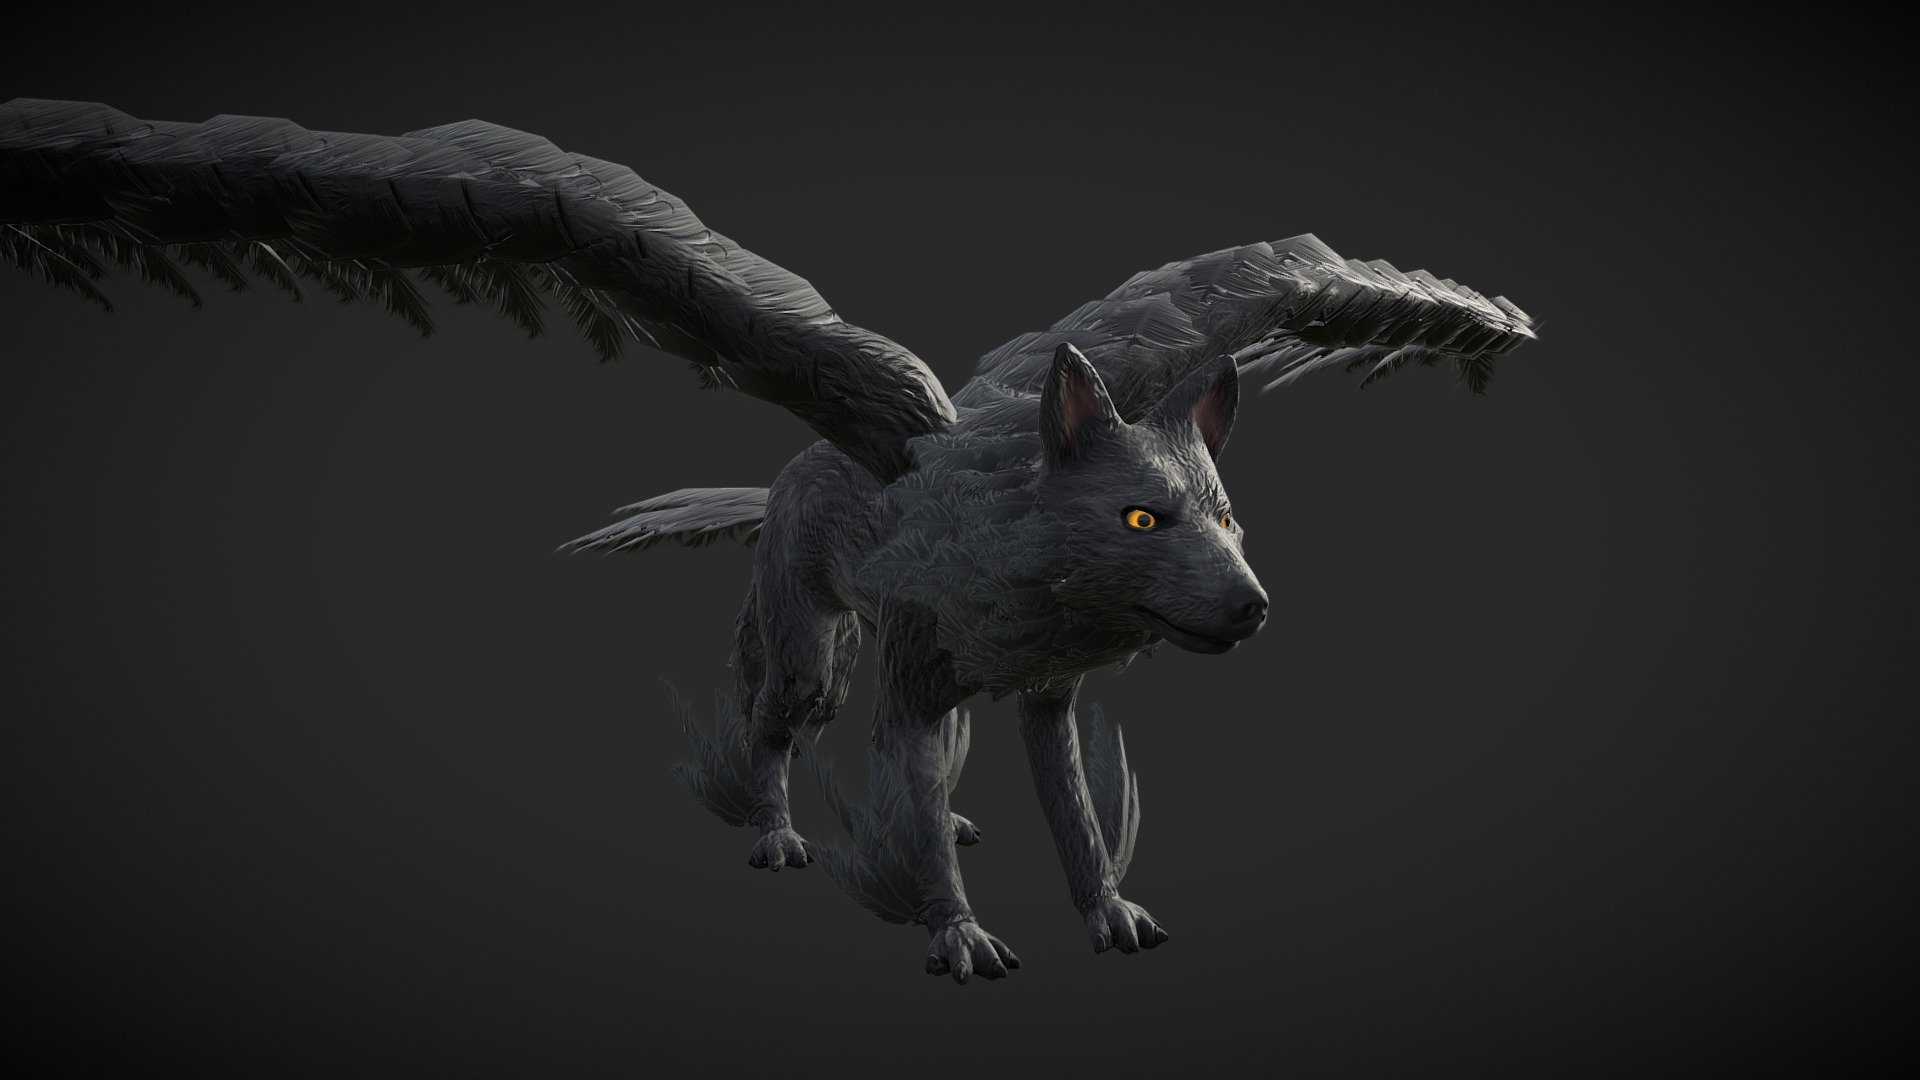 I sculpted the winged wolf in Zbrush then remeshed it. The wing feathers were made in blender using planes. UV'ing was also done in blender. All the texturing was done in substance painter 3d model